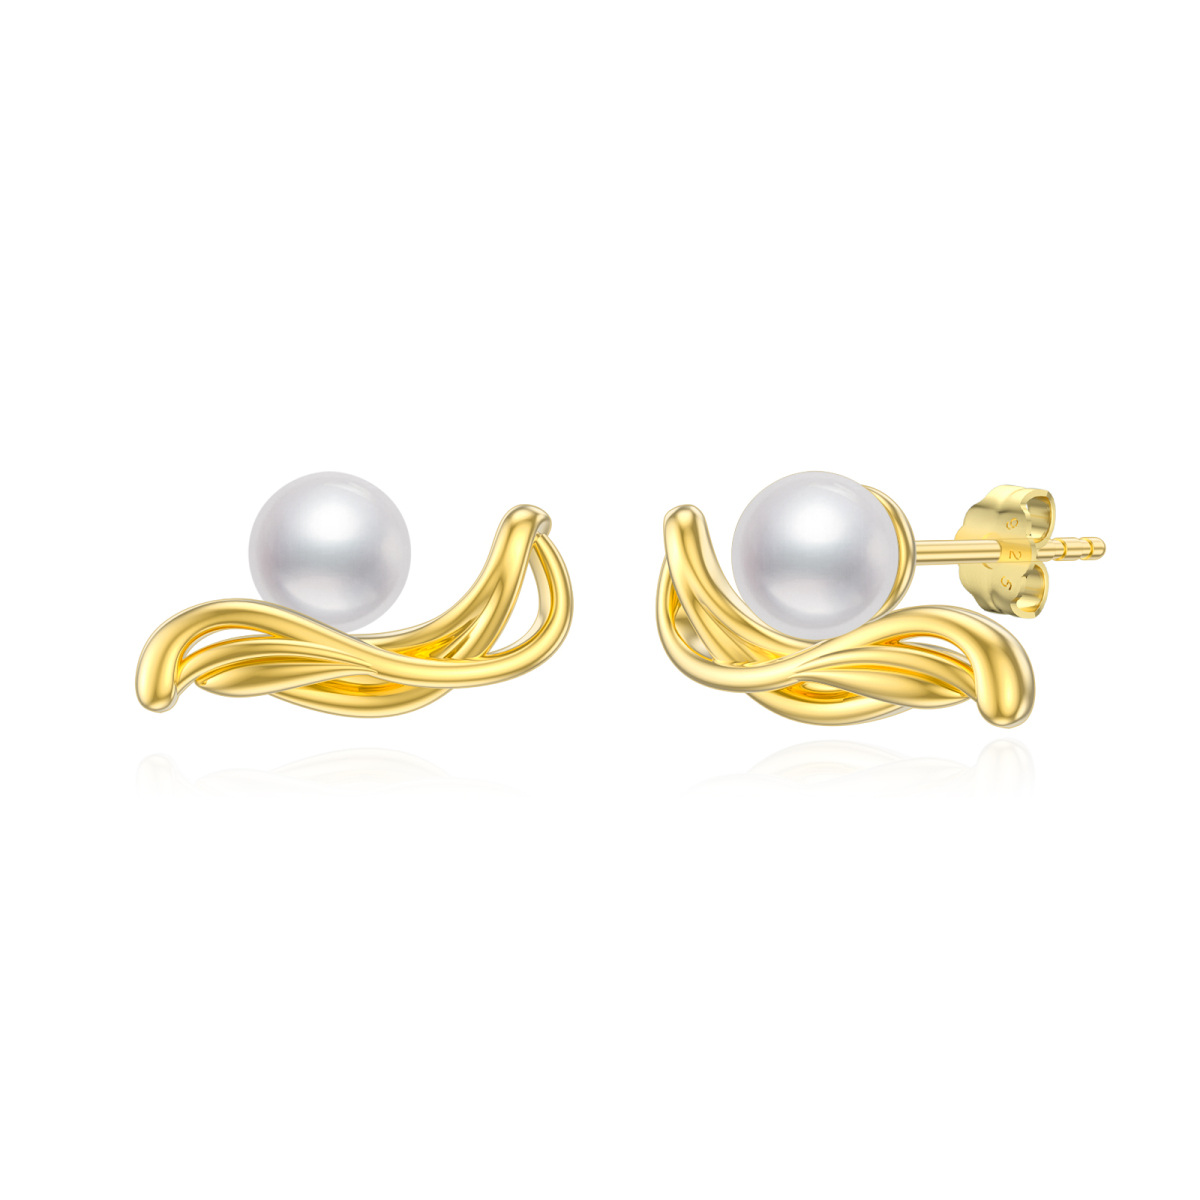 Gold Plated Irregular Pearl Stud Earrings Sterling Silver Gifts For Women Girls-1